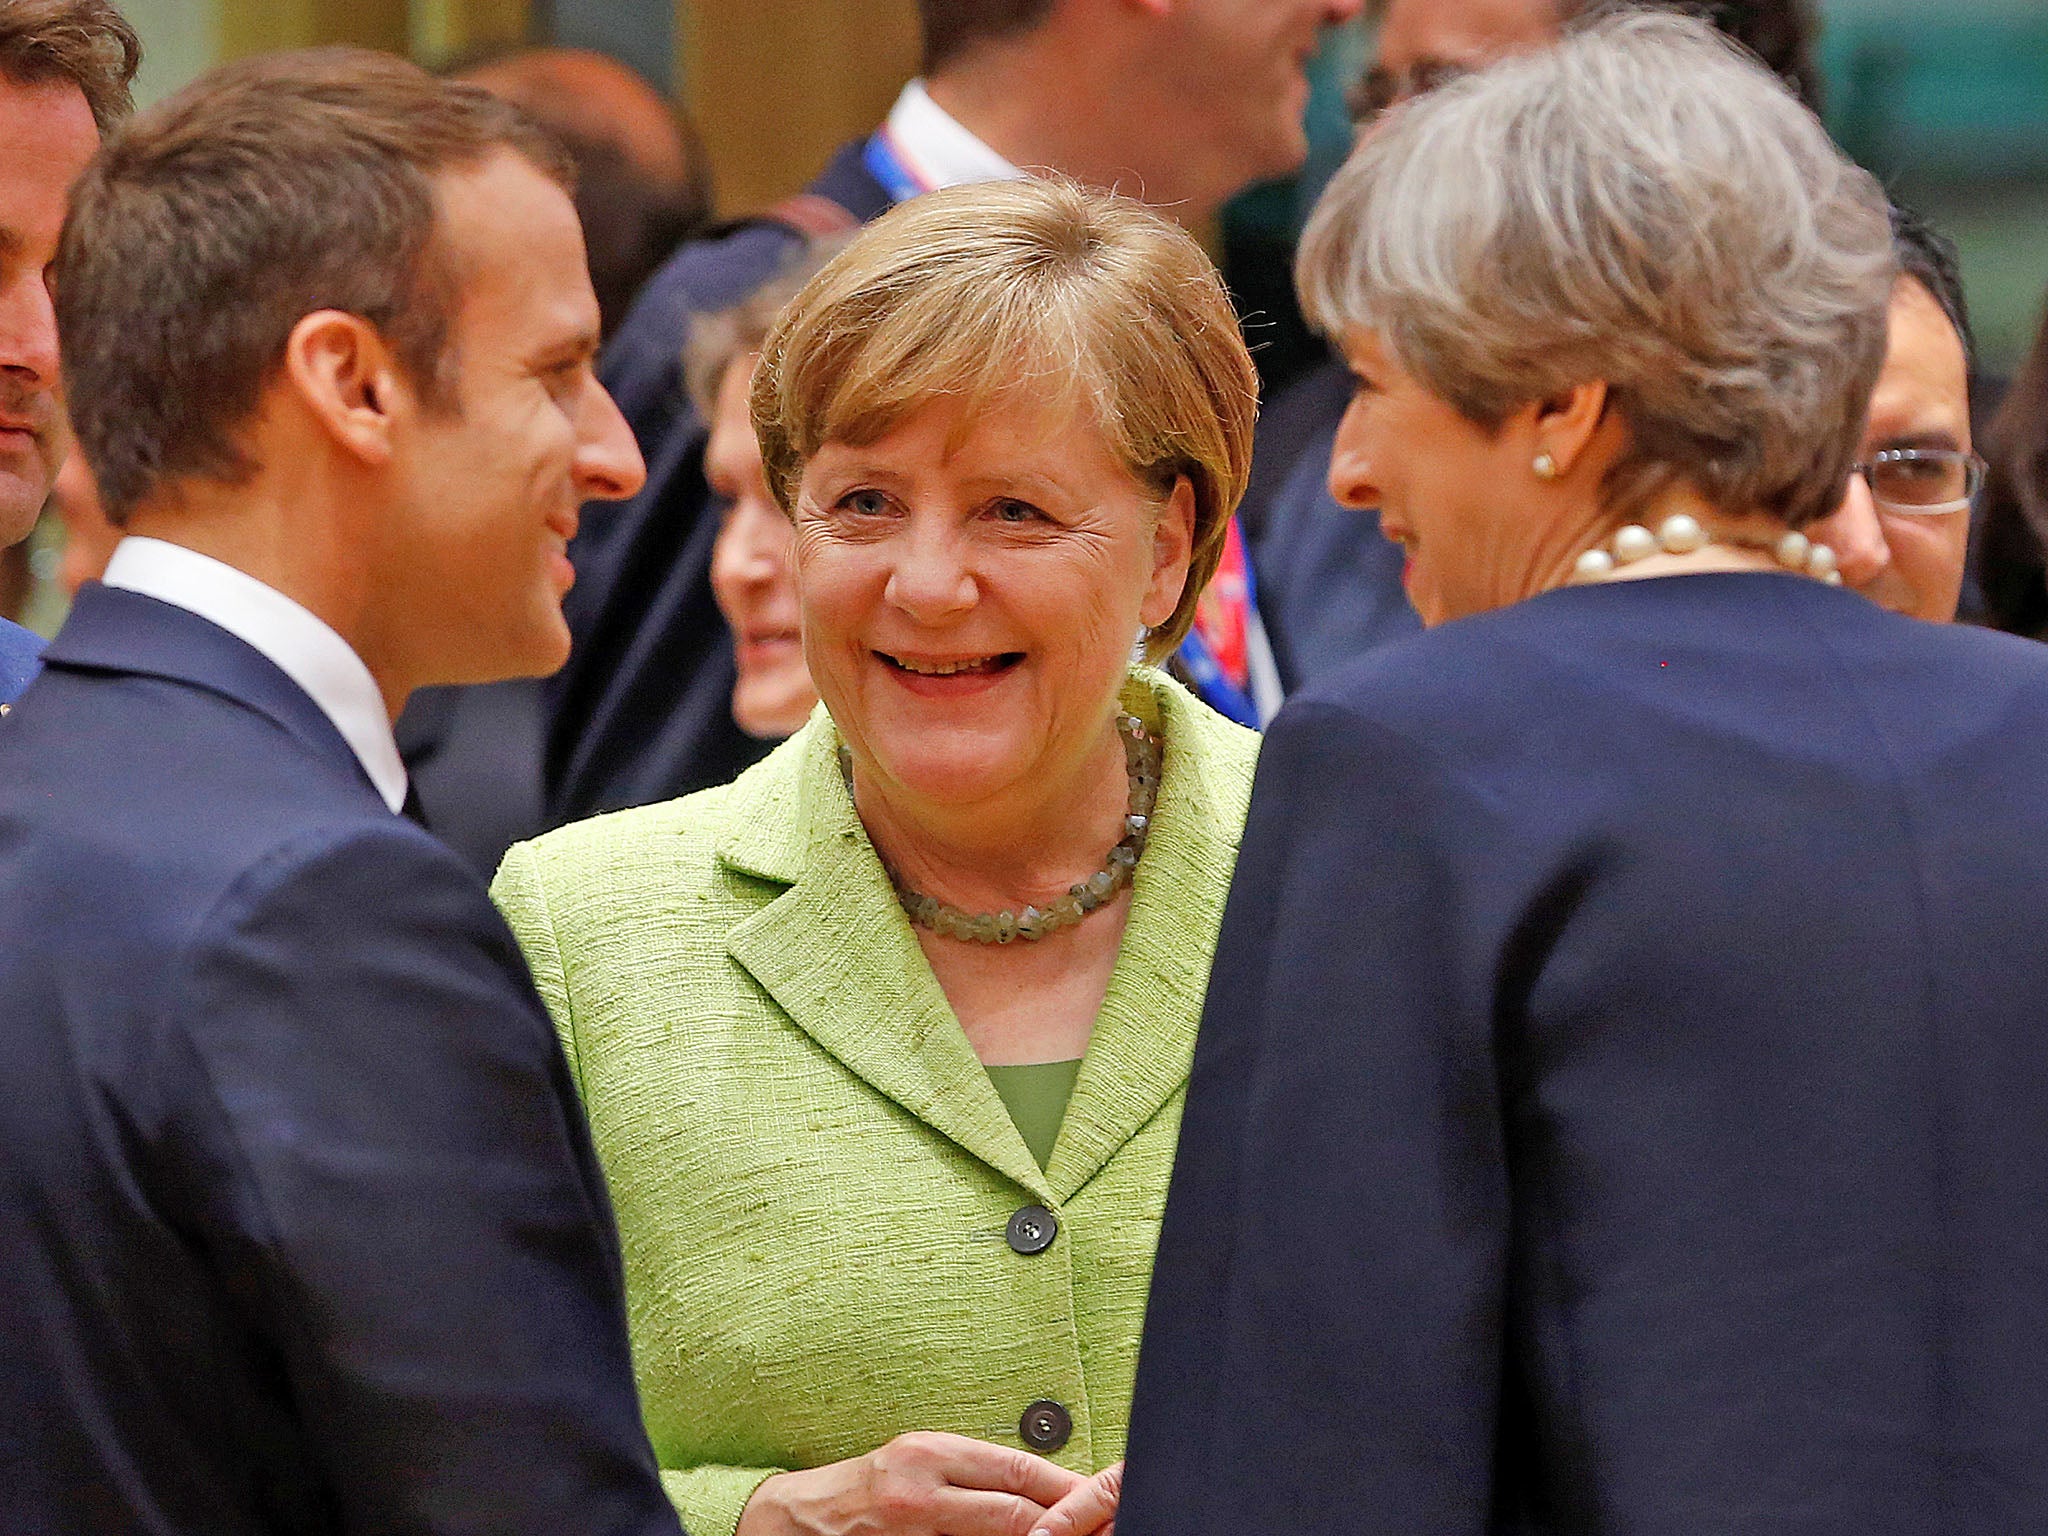 France has always been inextricably linked to Germany in a way that the UK has managed to avoid